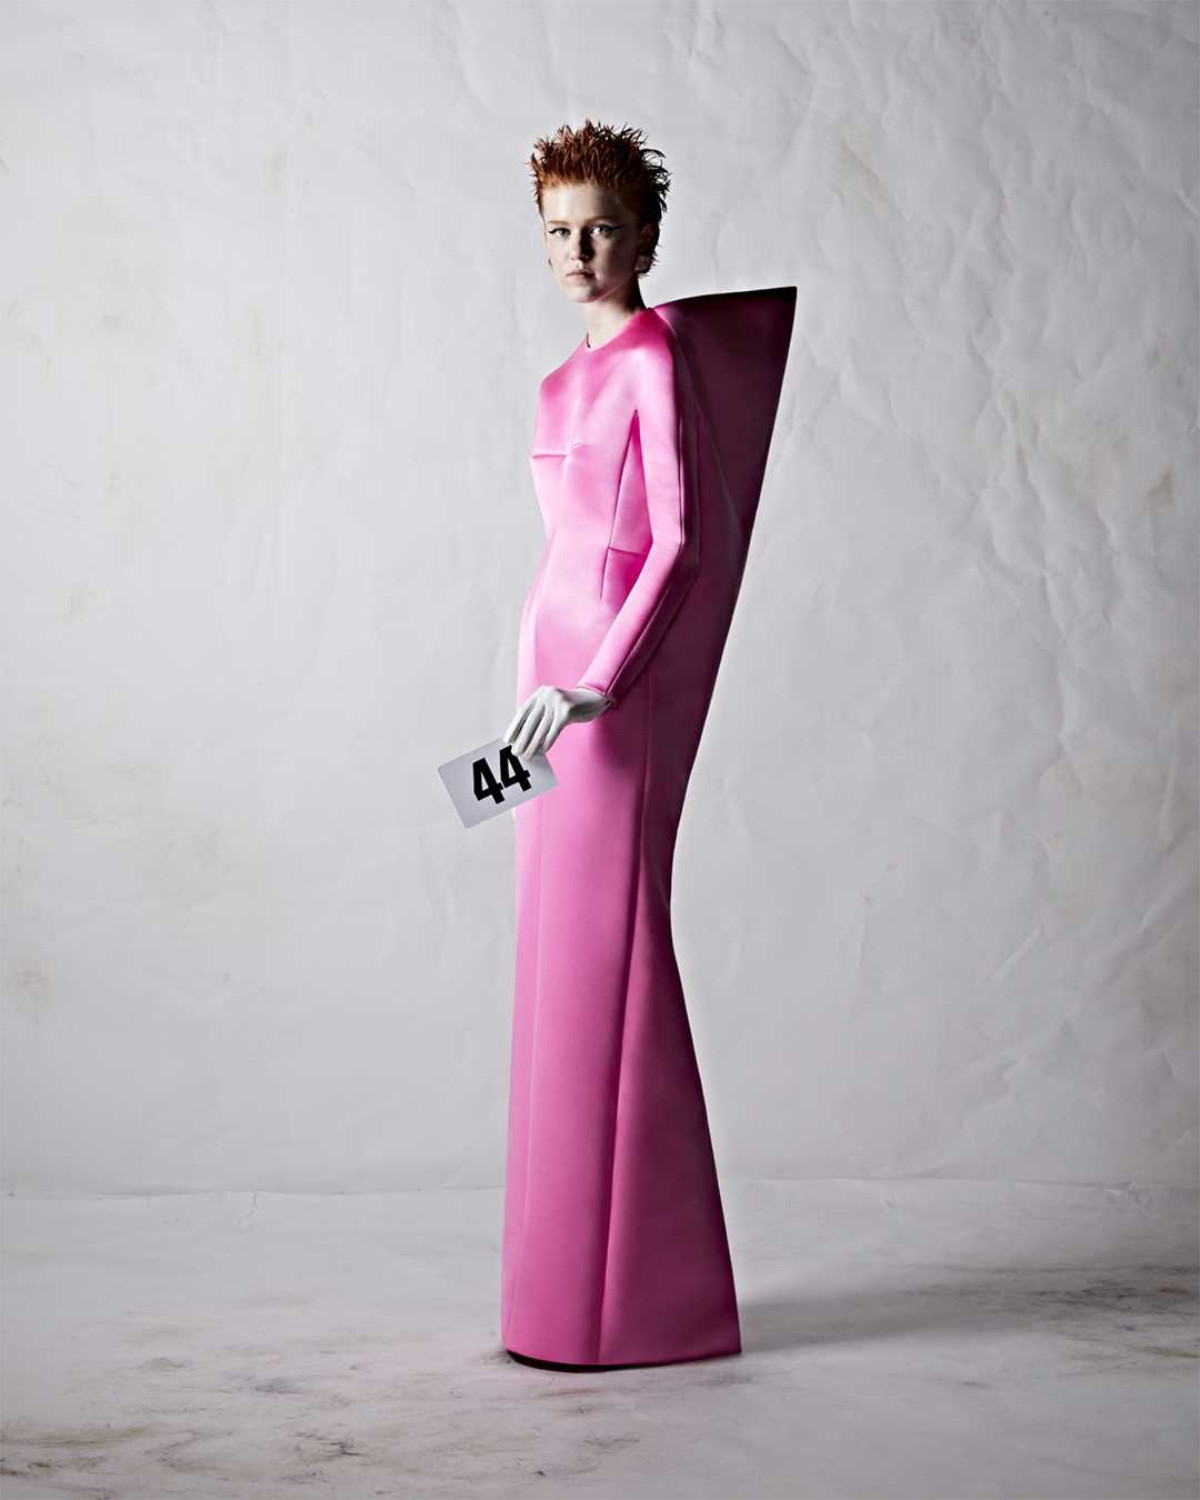 Balenciaga Presents Its New 51st Couture Collection